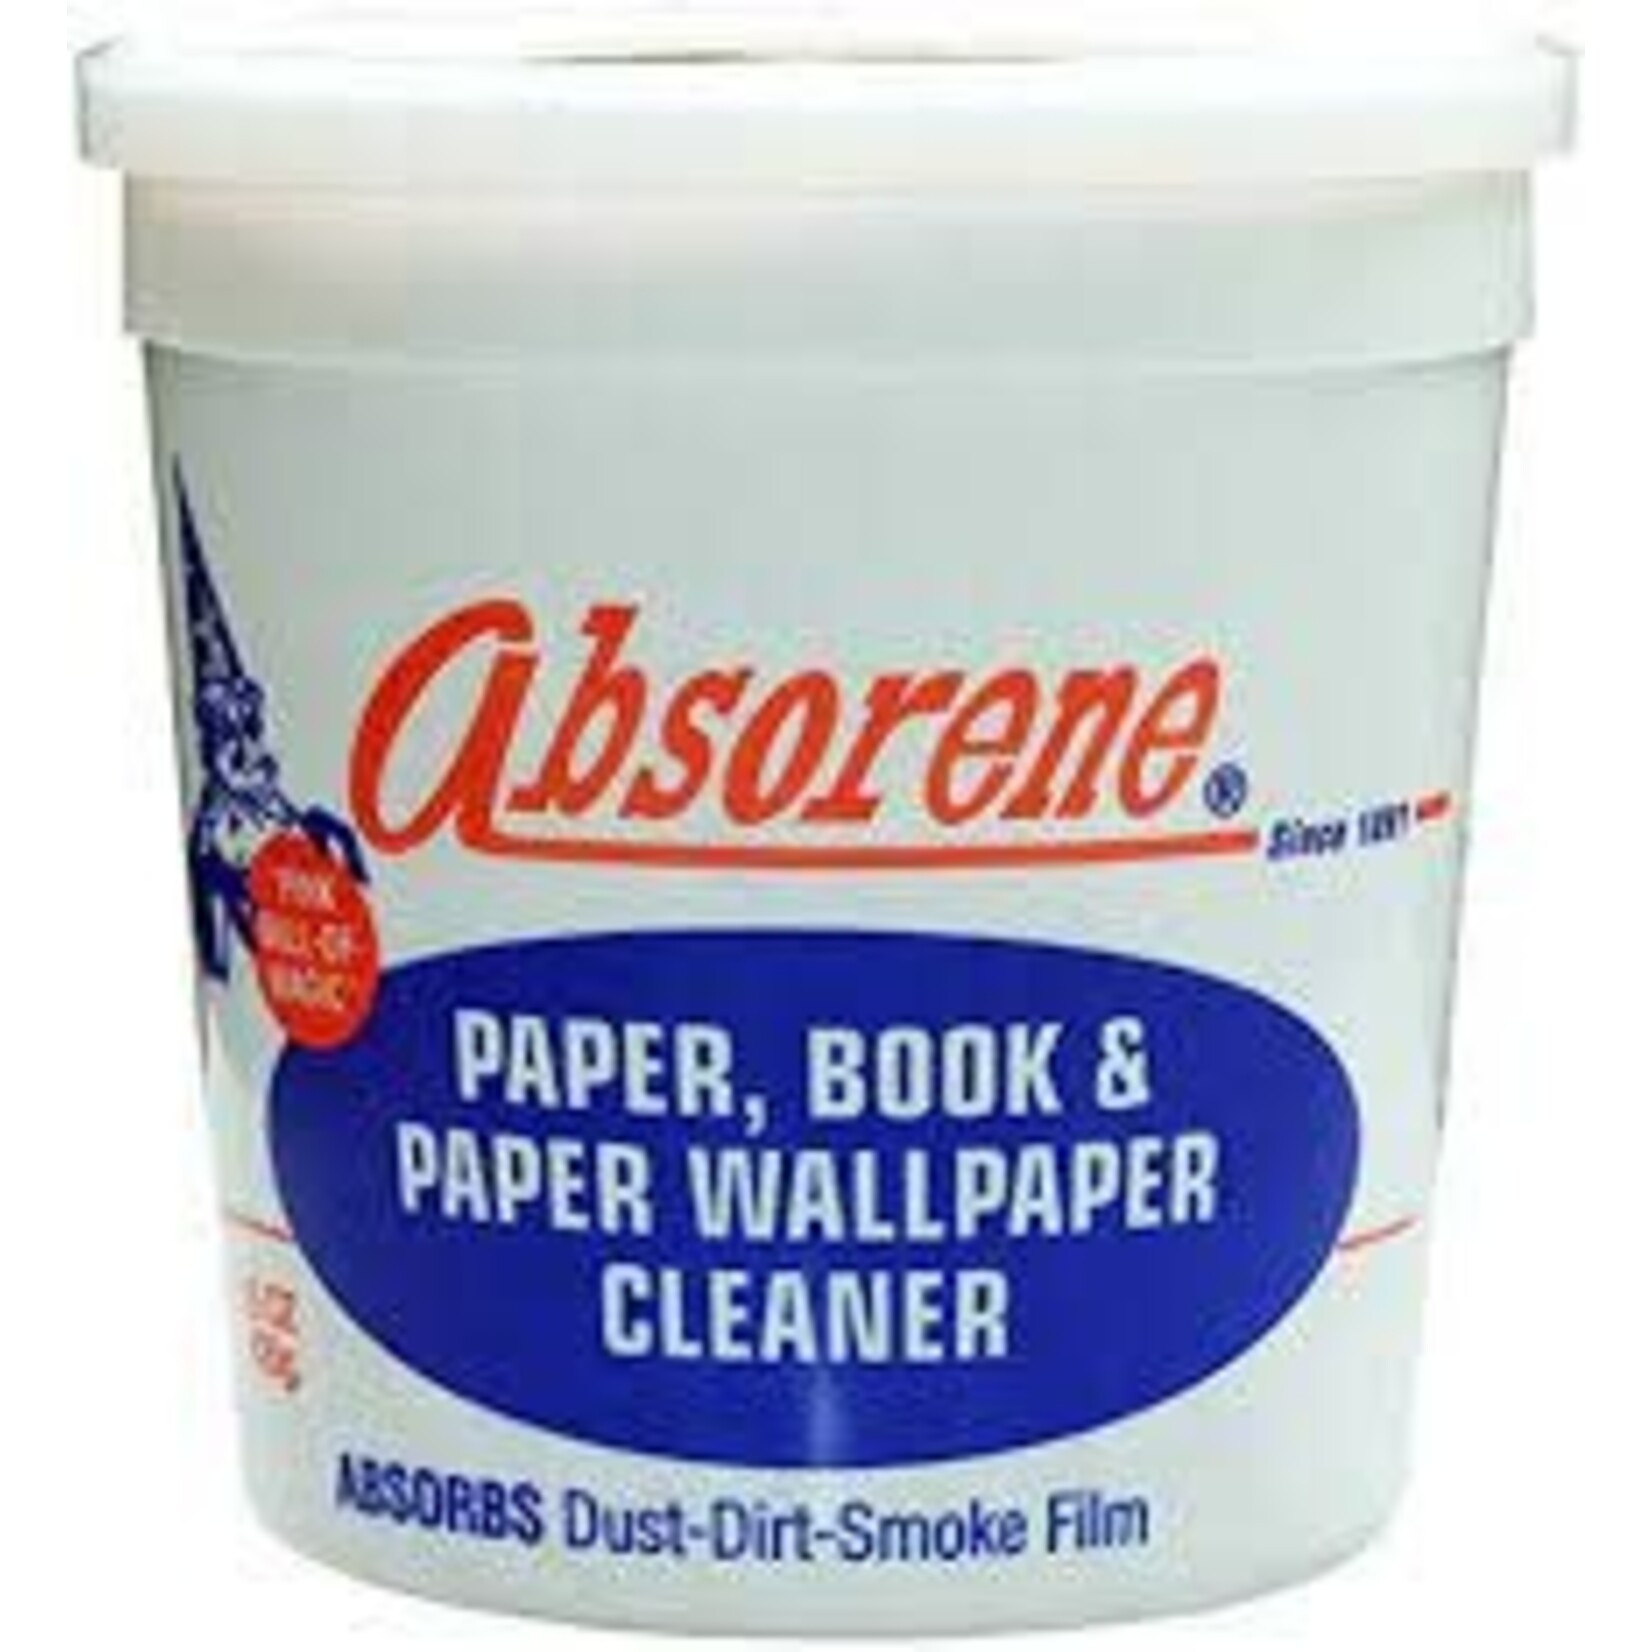 Absorbene Paper & Book Cleaner [DISCONTINUED]